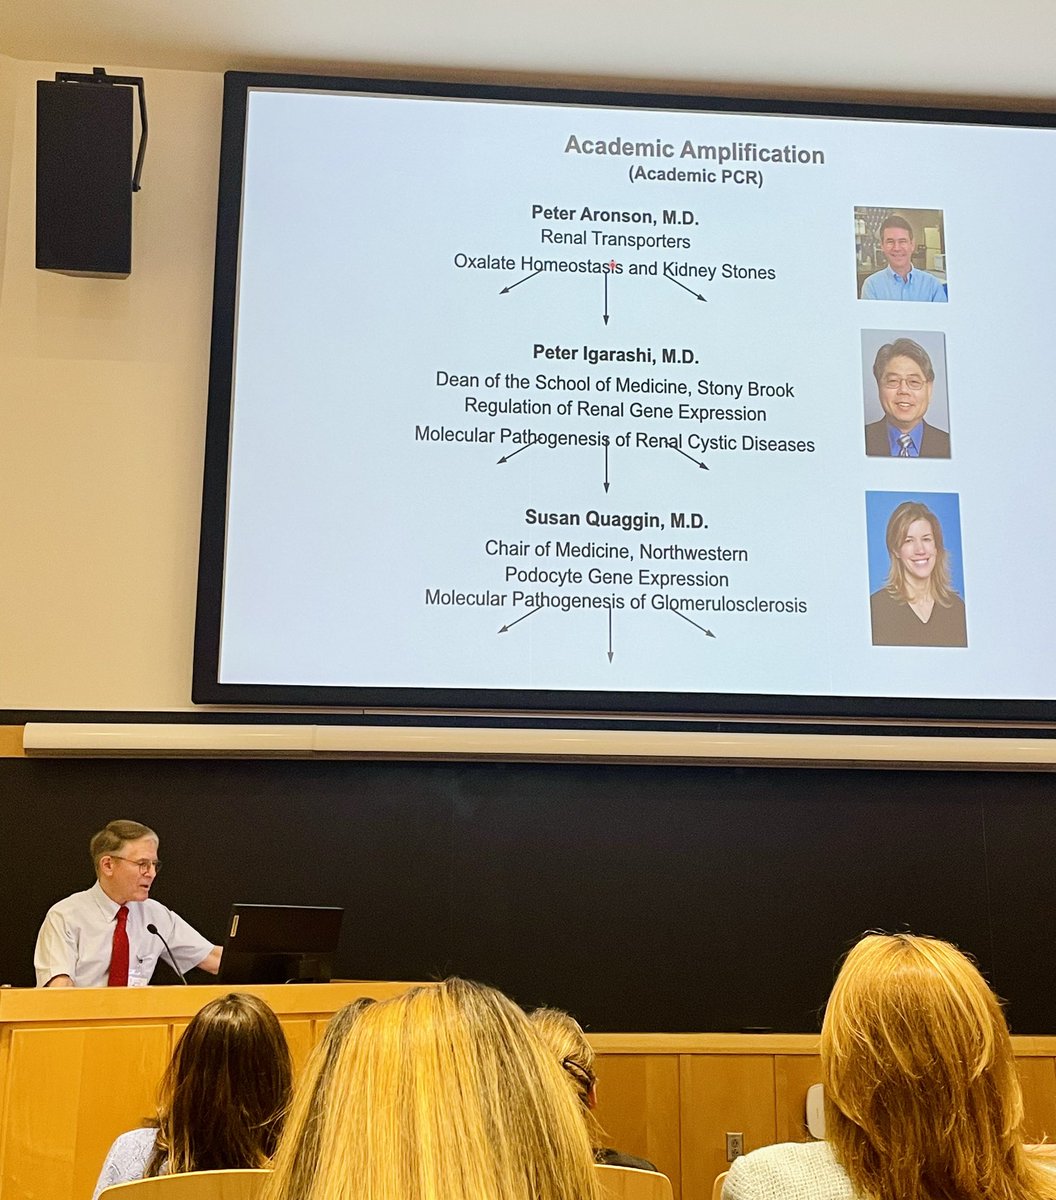 Dr. Peter Aronson gave the 36th annual Farr lecture at @YaleMed Student Research Day today! Summary of so much wisdom in just 1 hour: You can’t know your research will directly make a difference, but by being a part of the “Academic PCR” you are guaranteed to make a difference.👏